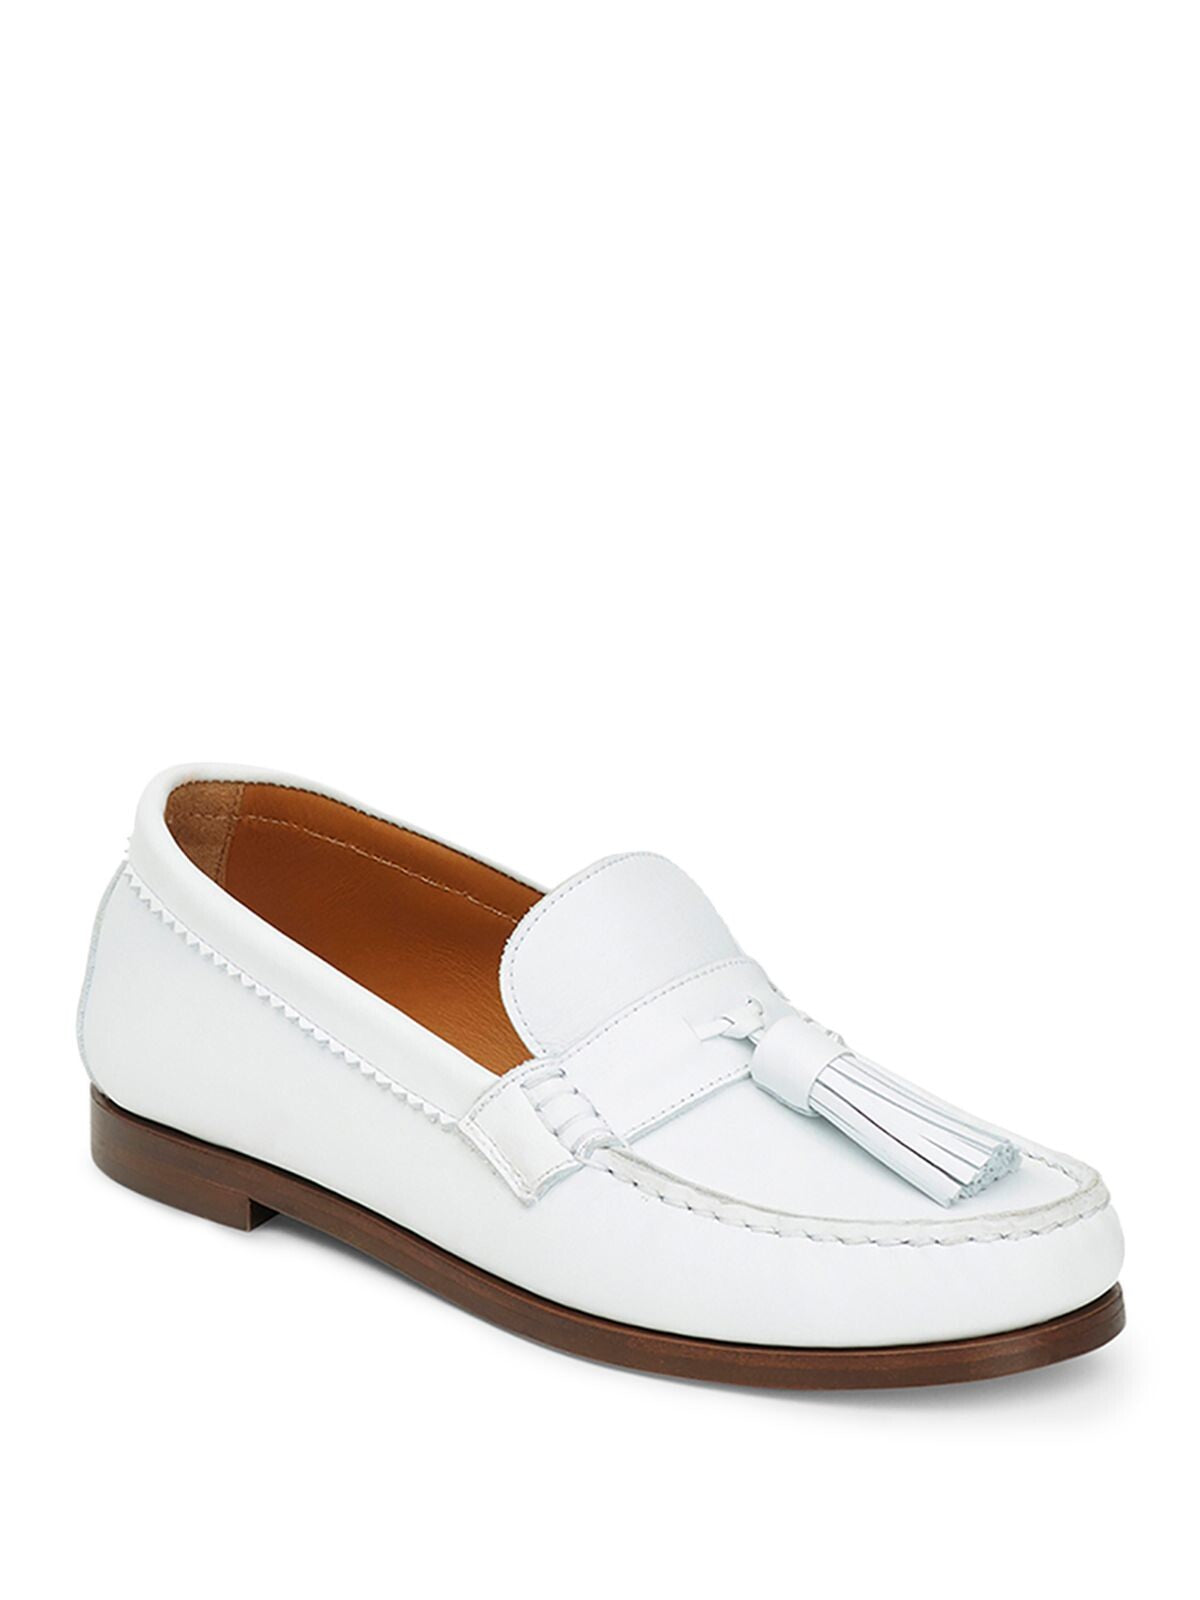 LAFAYETTE 148 NEW YORK Womens White Tasseled Comfort Frieda Round Toe Slip On Leather Loafers Shoes 38.5